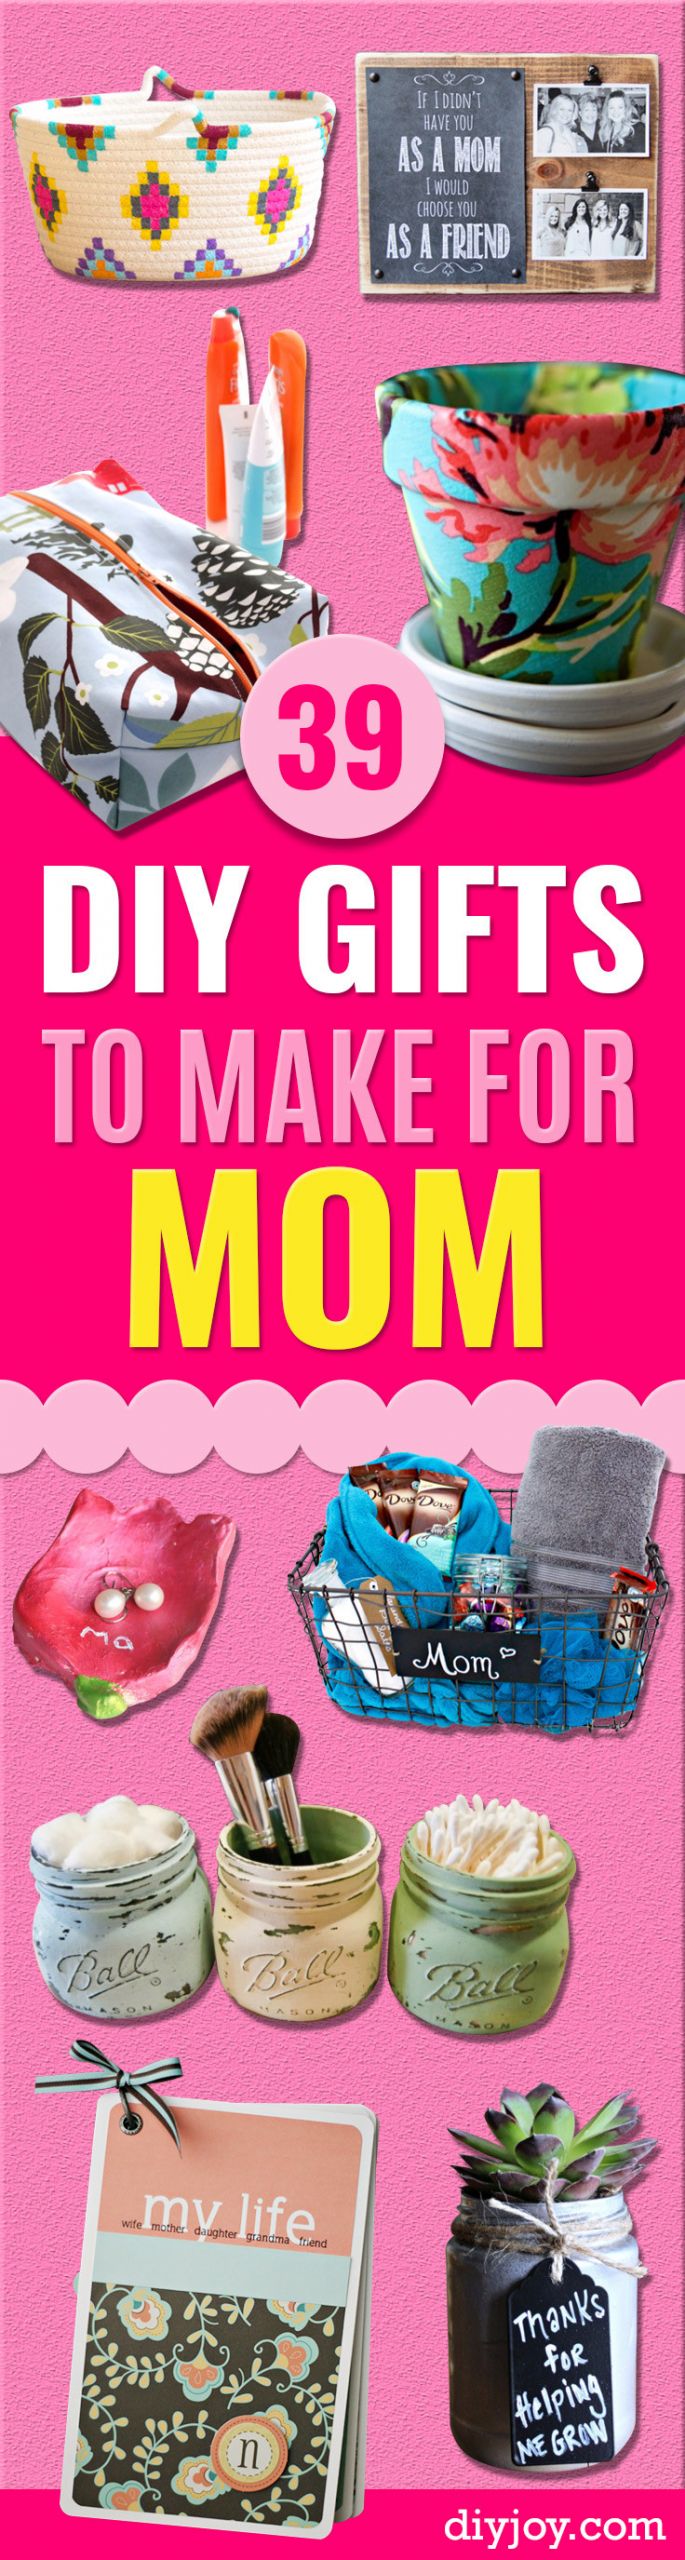 Birthday Gift Ideas For Moms
 39 Creative DIY Gifts to Make for Mom